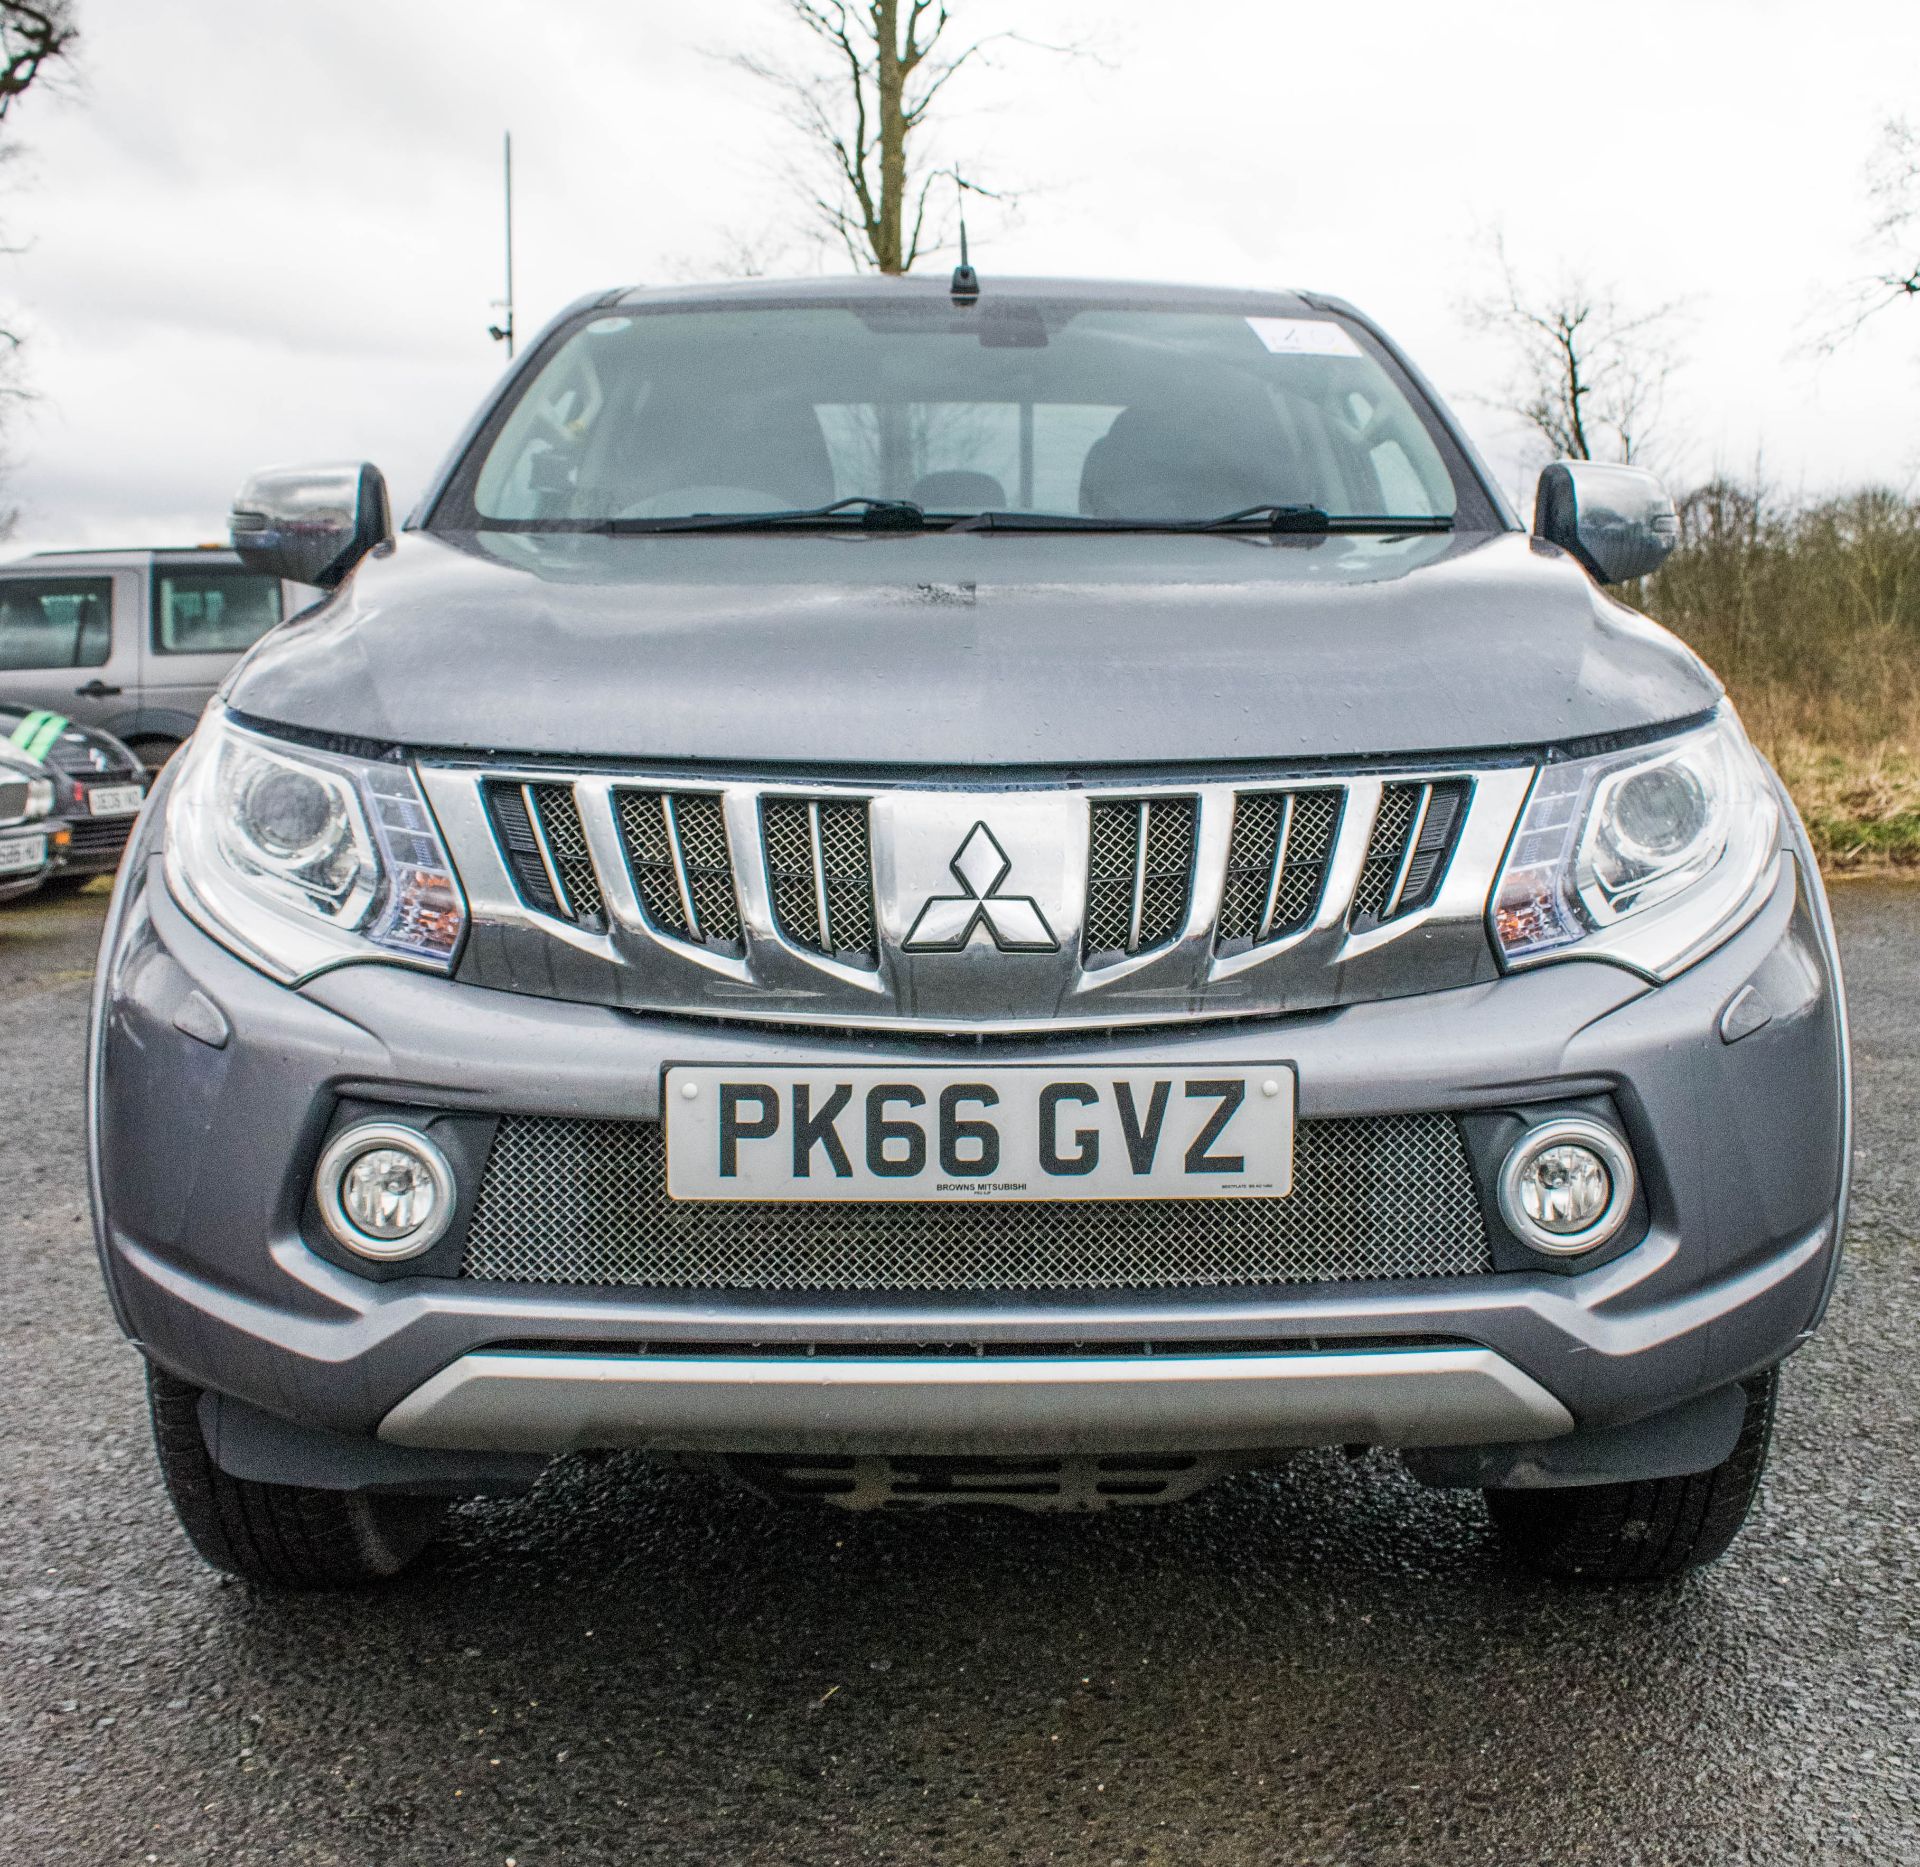 Mitsubishi L200 Barbarian DCB DI-D 2.5 diesel 4 wheel drive double cab pick up Registration - Image 5 of 21